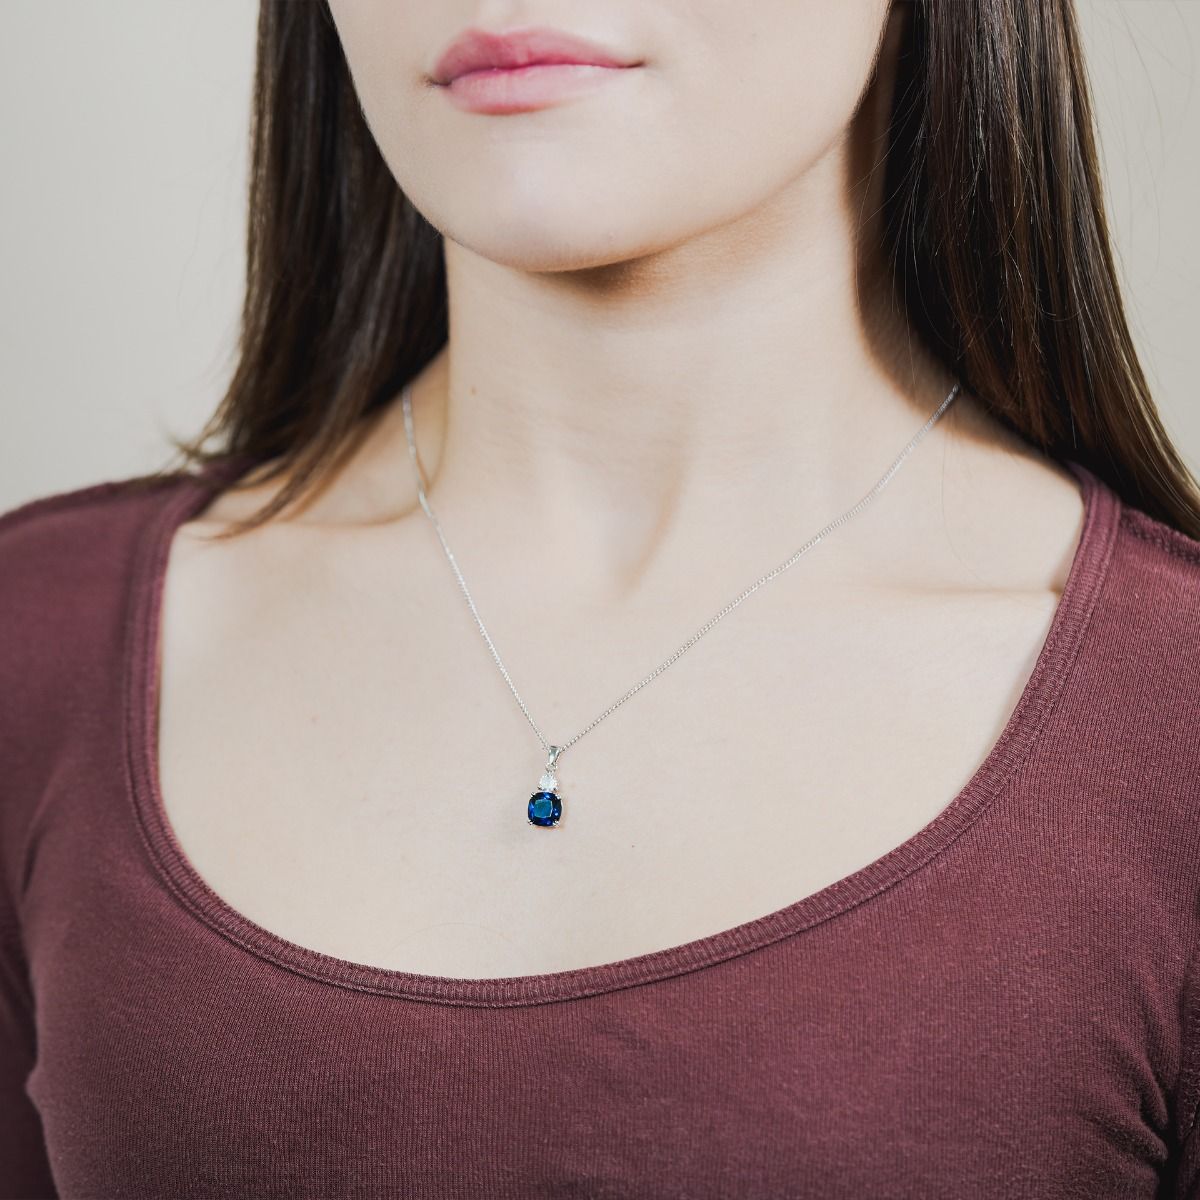 Discover the enchantment within our Sapphire Cushion Double Drop Pendant. A stunning halo of flawlessly cut cubic zirconia stones encircles an impressive cushion-cut centre stone in a captivating Sapphire hue. 